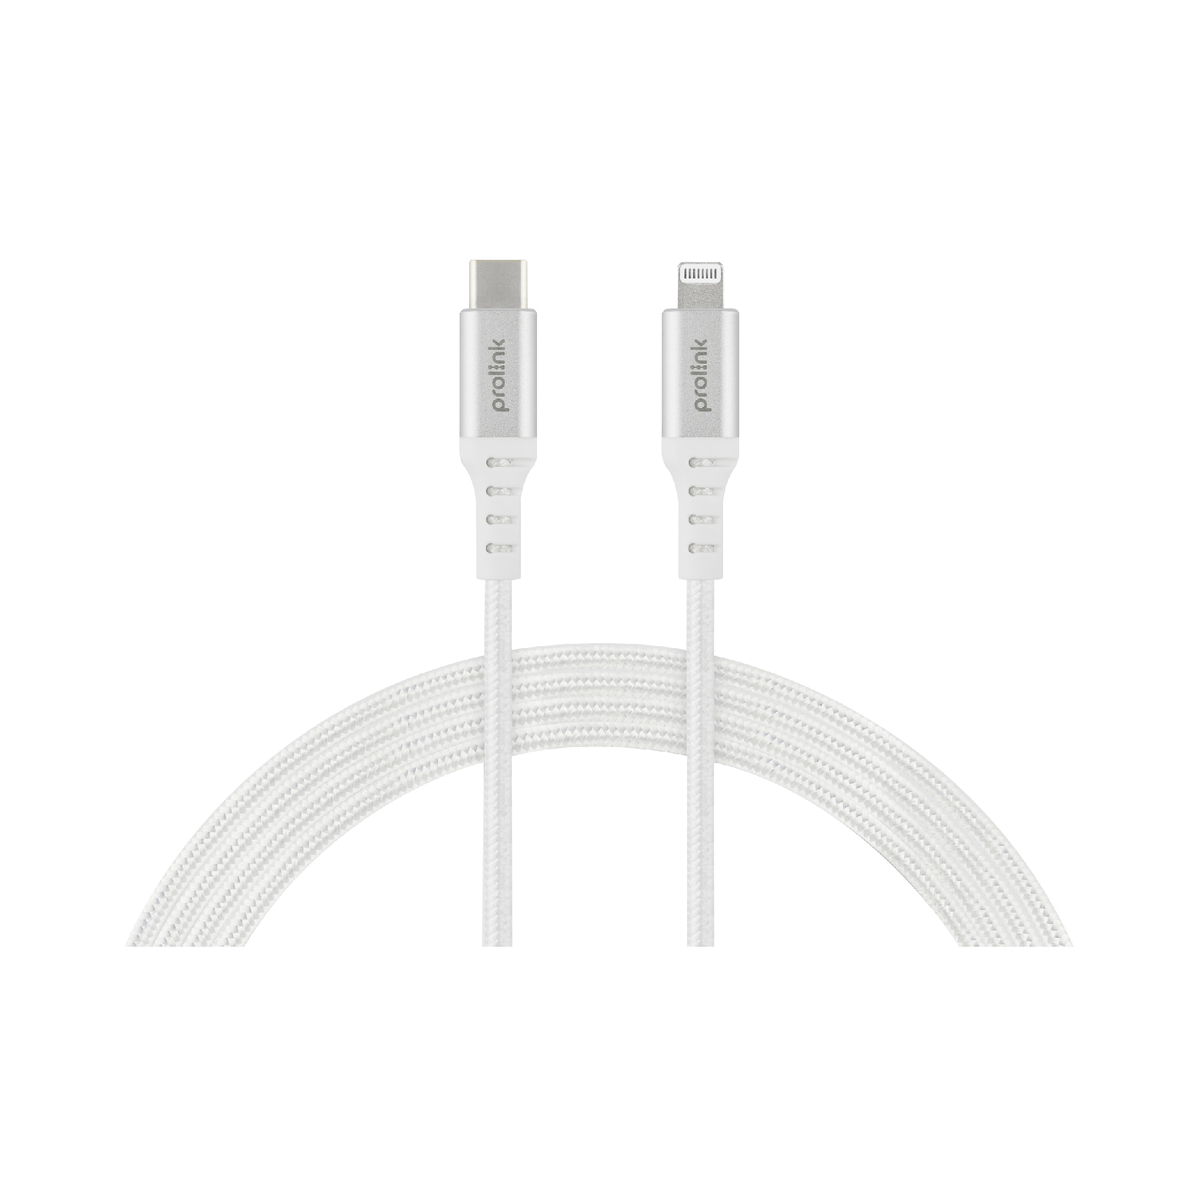 Prolink Cable GCL3001 Cto Lighting